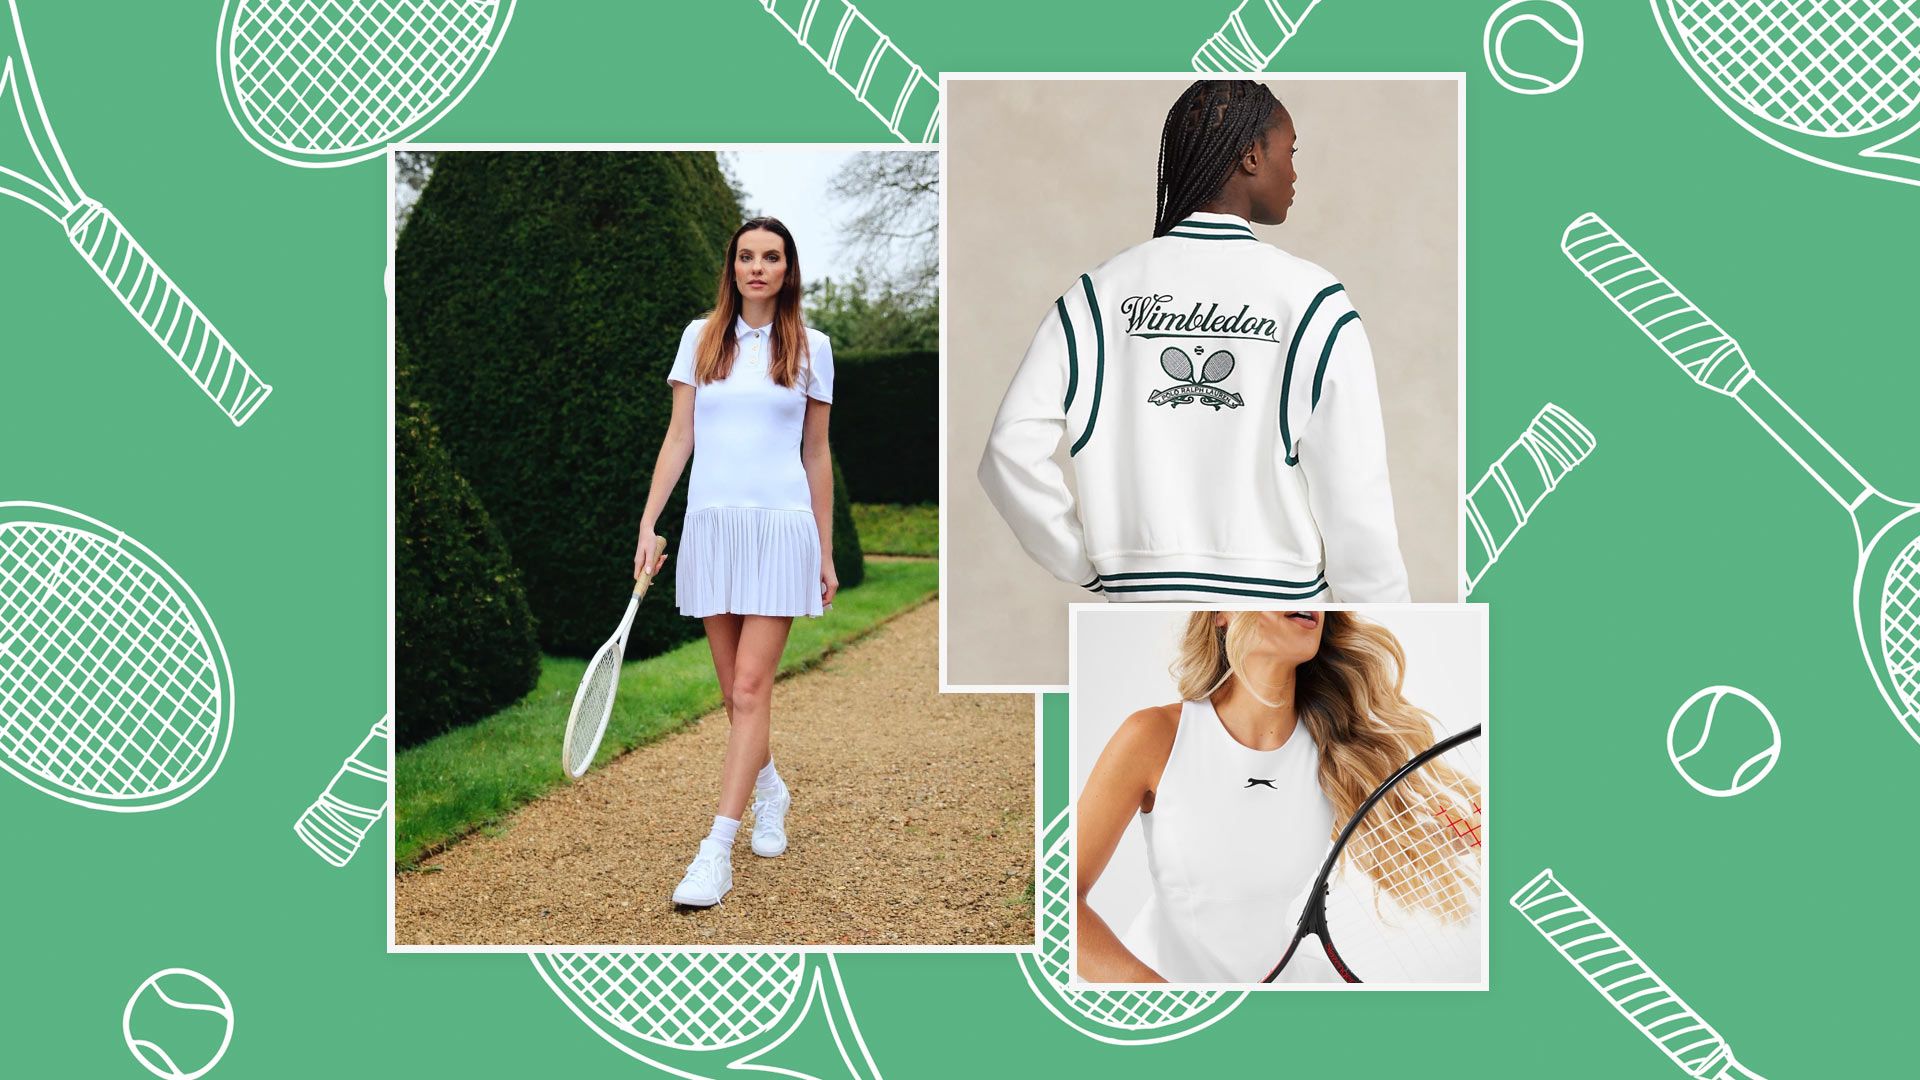 19 best tennis outfits for women as we prepare for Wimbledon fever